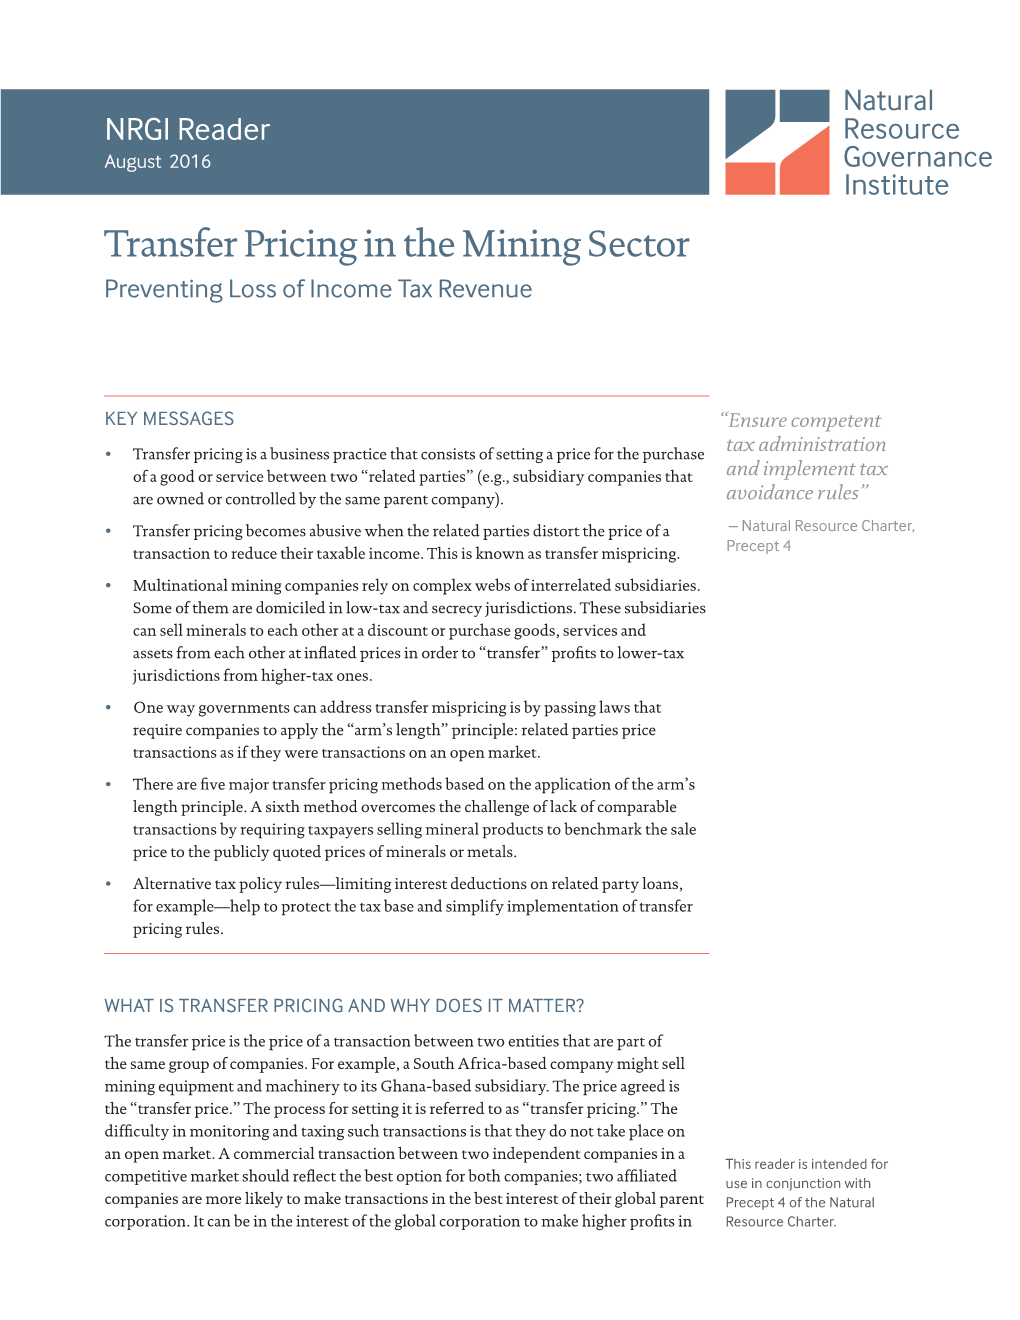 Transfer Pricing in the Mining Sector Preventing Loss of Income Tax Revenue